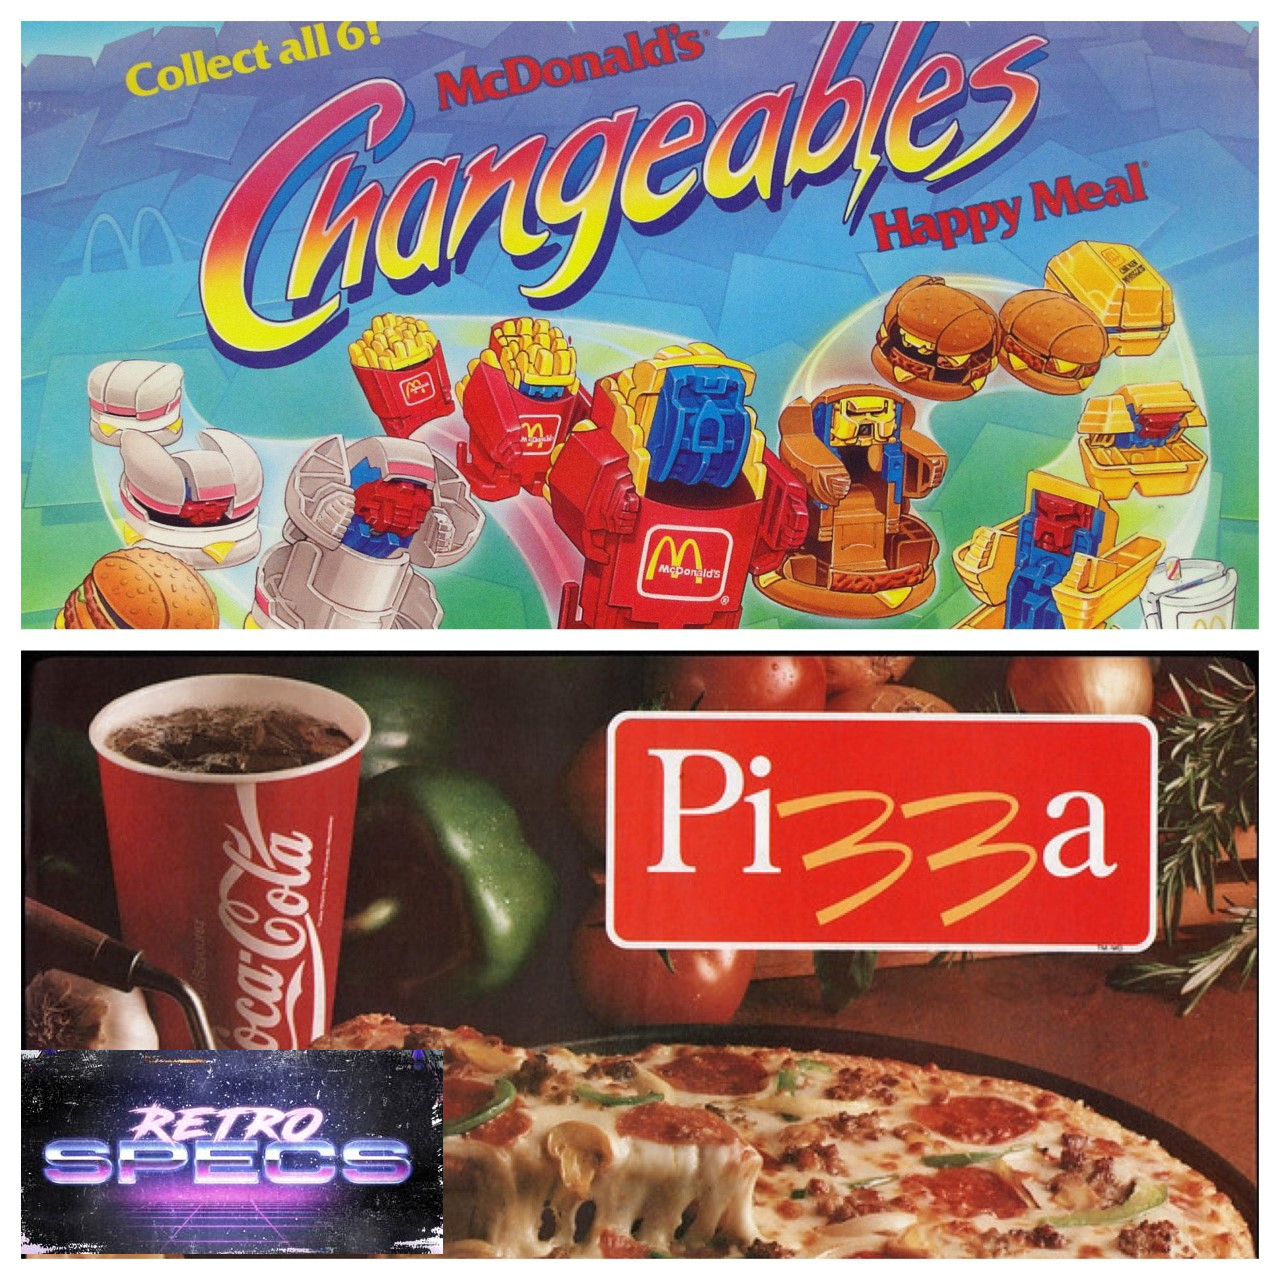 McDonalds Style Transformers And Pizza? Grab Yourself A McPizza And Hope For A Changables In Your Happy Meal! I LRM’s Retro-Specs